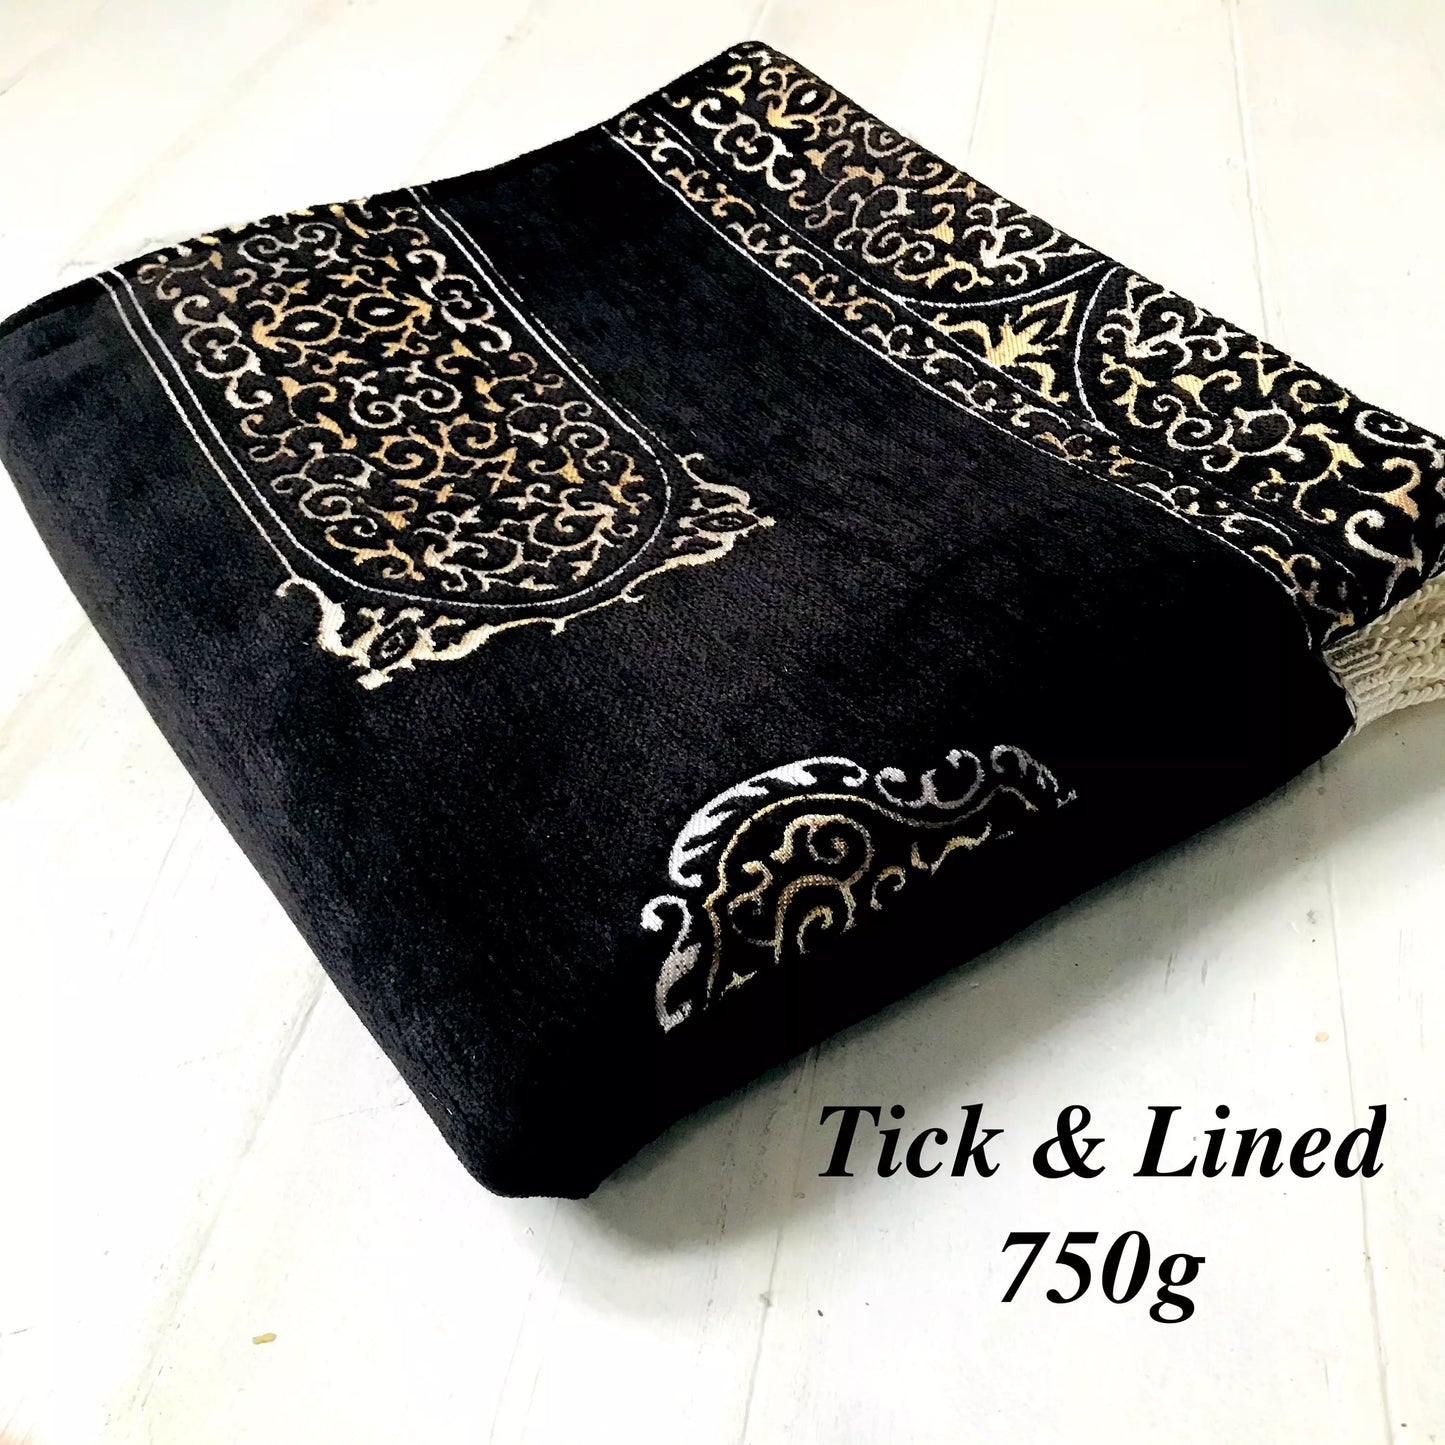 Kaaba Patterned, Lined Prayer Rug with Gift Bag